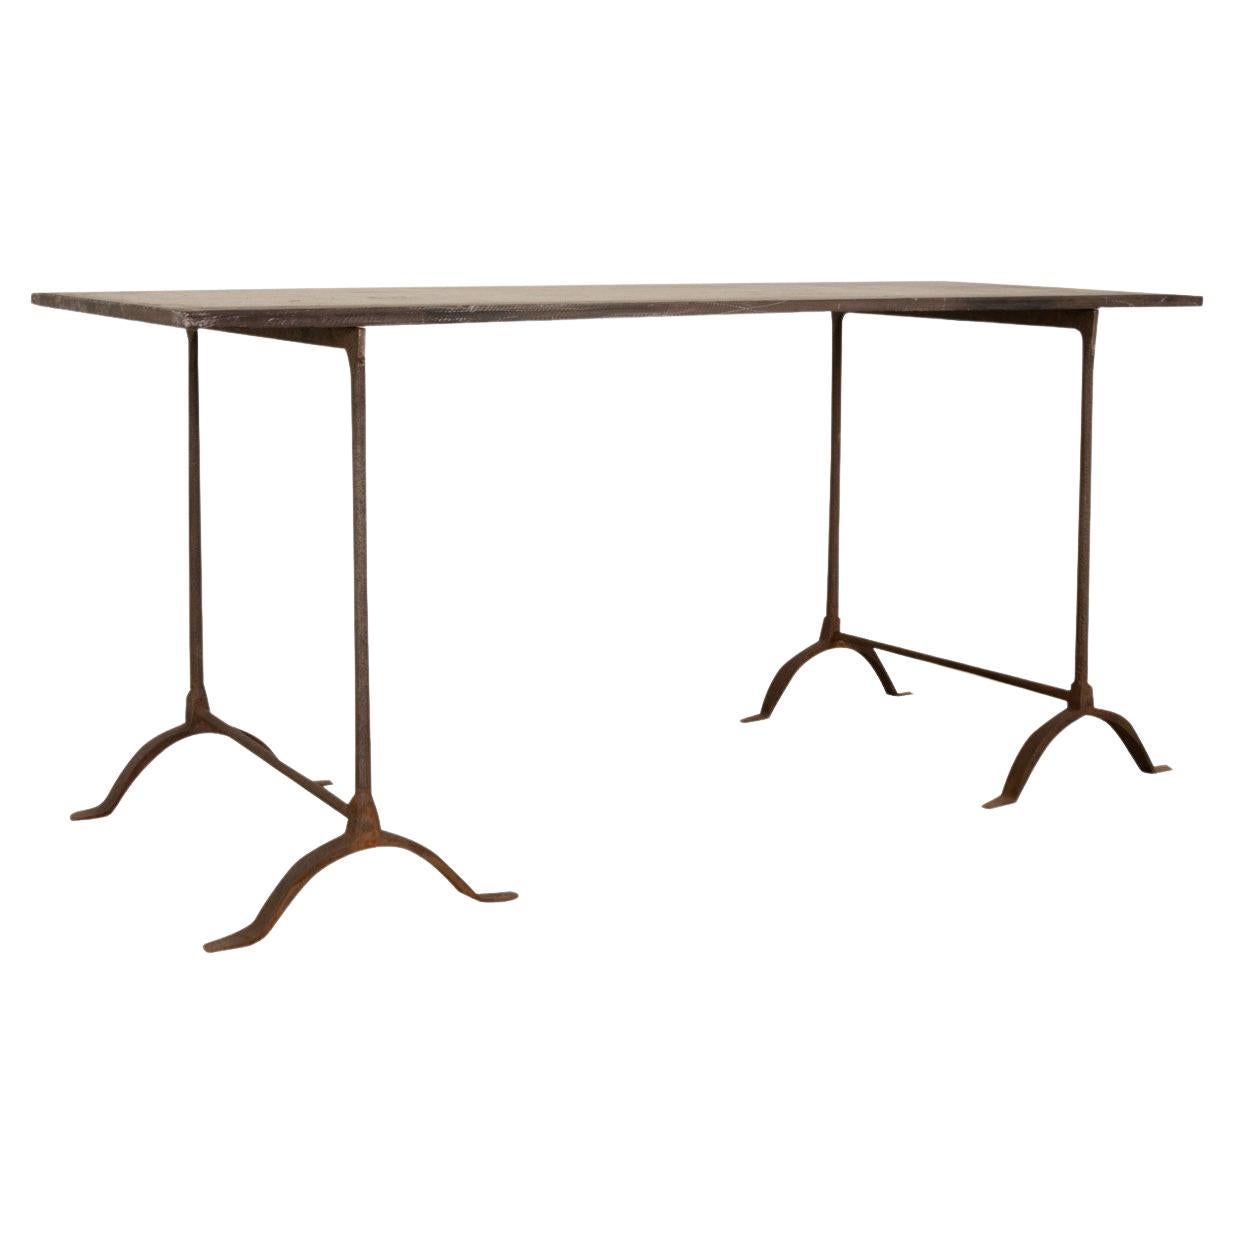 English 19th Century Iron & Slate Work Table For Sale